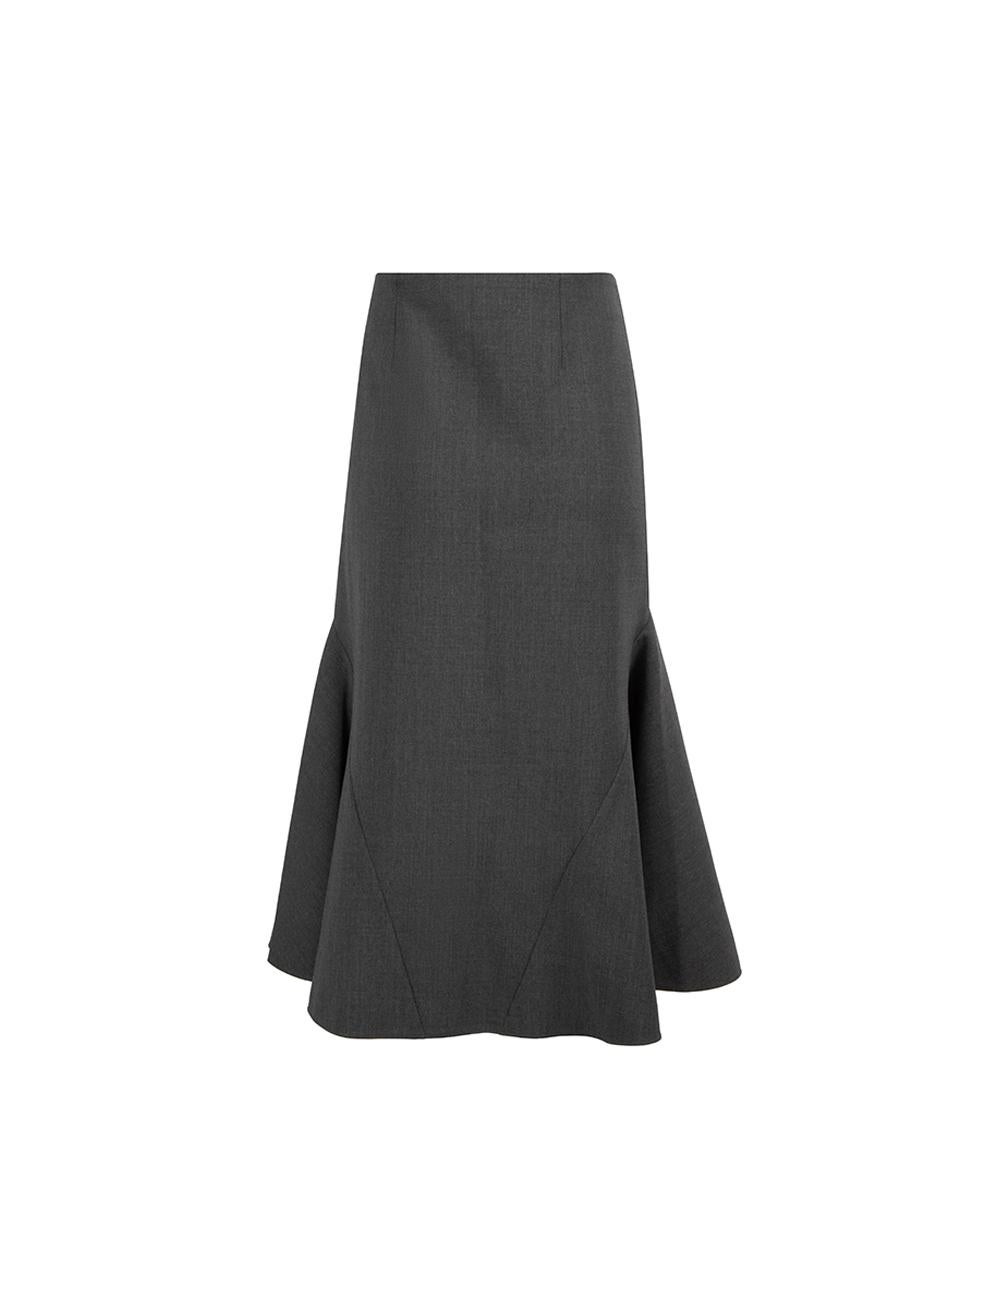 Pre-Loved Stella McCartney Women's Grey High Waisted Flared Midi Skirt In Excellent Condition In London, GB